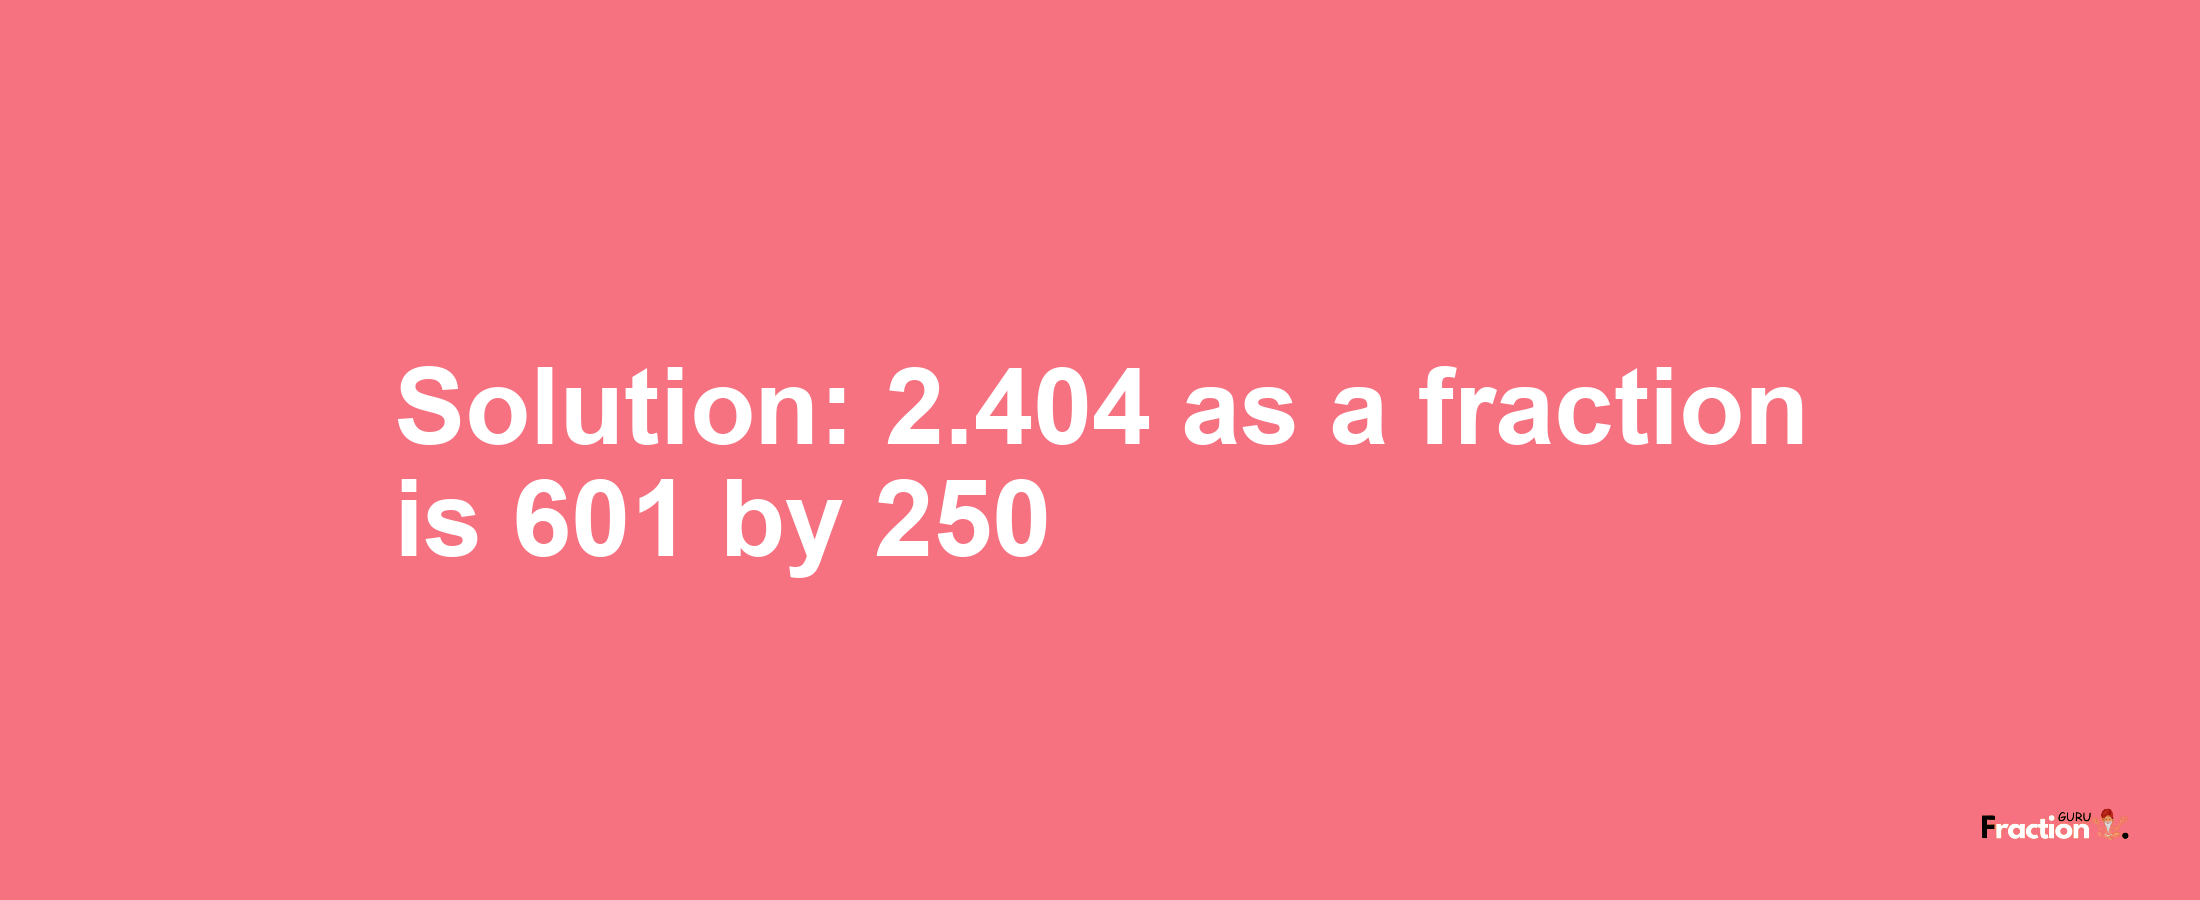 Solution:2.404 as a fraction is 601/250